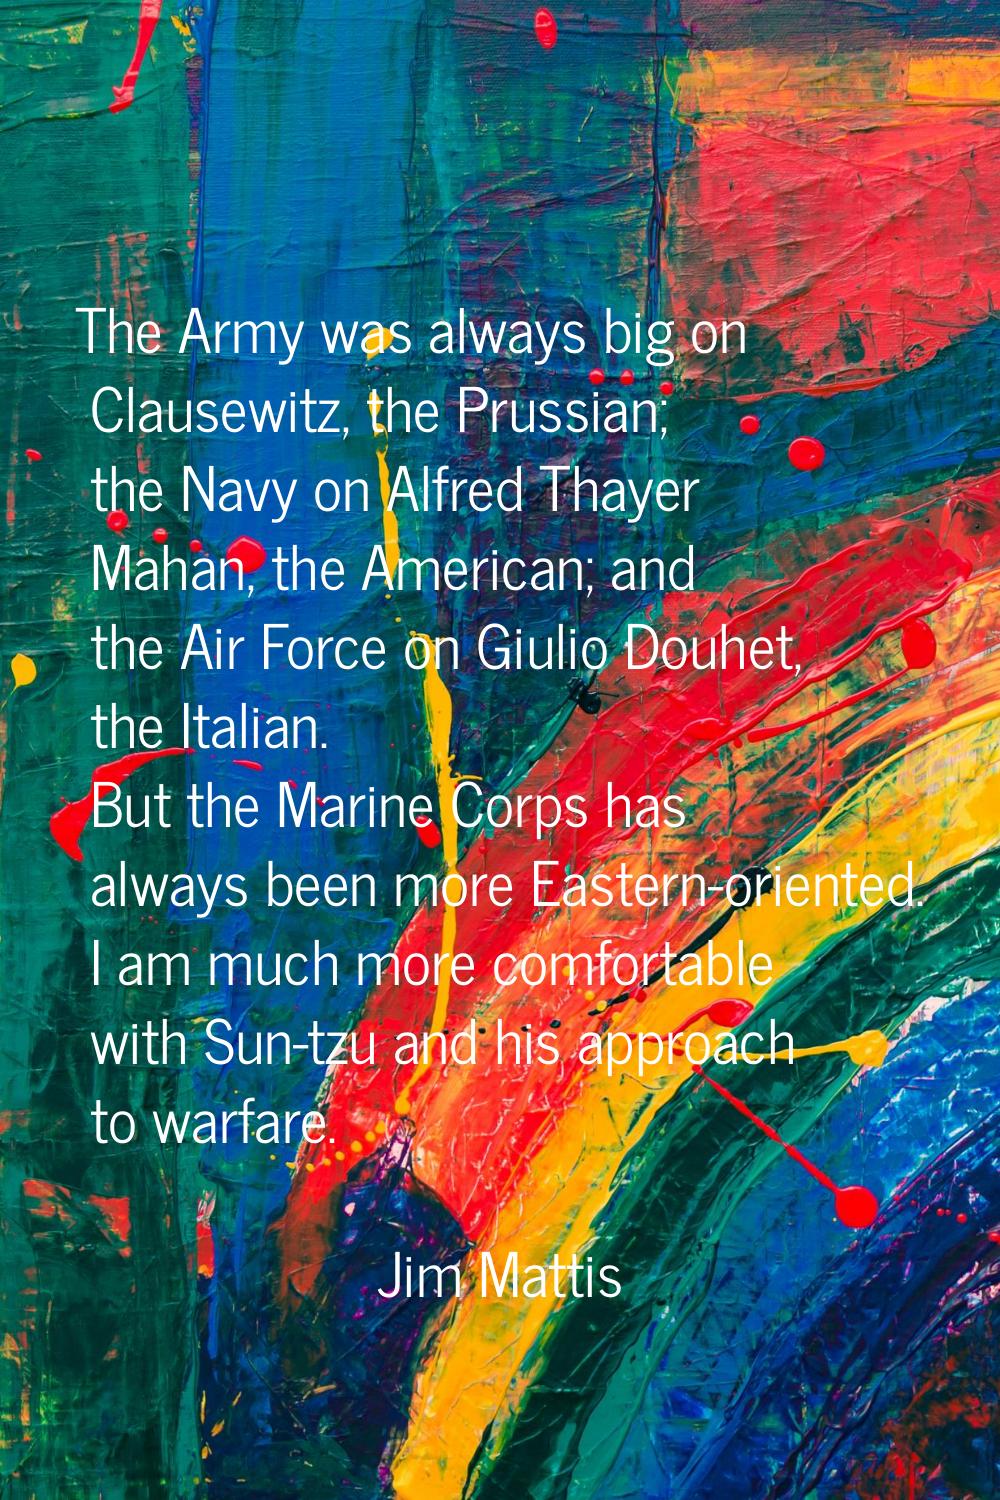 The Army was always big on Clausewitz, the Prussian; the Navy on Alfred Thayer Mahan, the American;